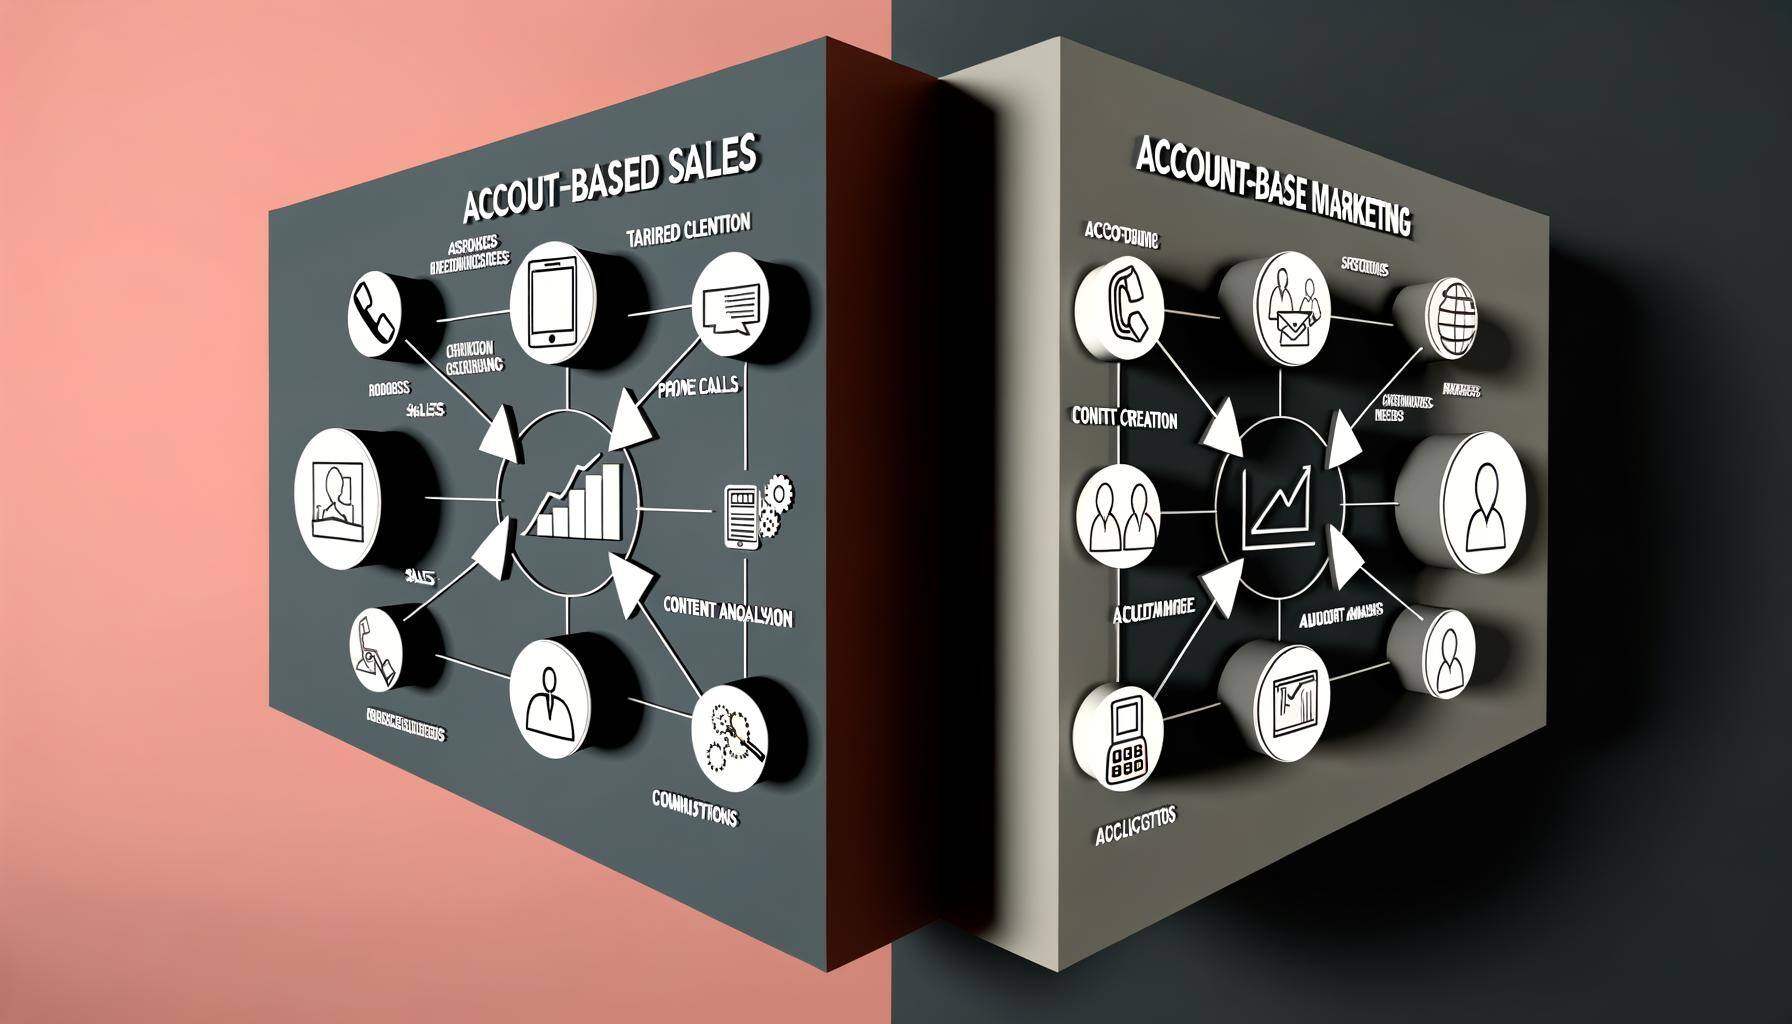 Account-based Sales (ABS) vs Account-based Marketing (ABM)